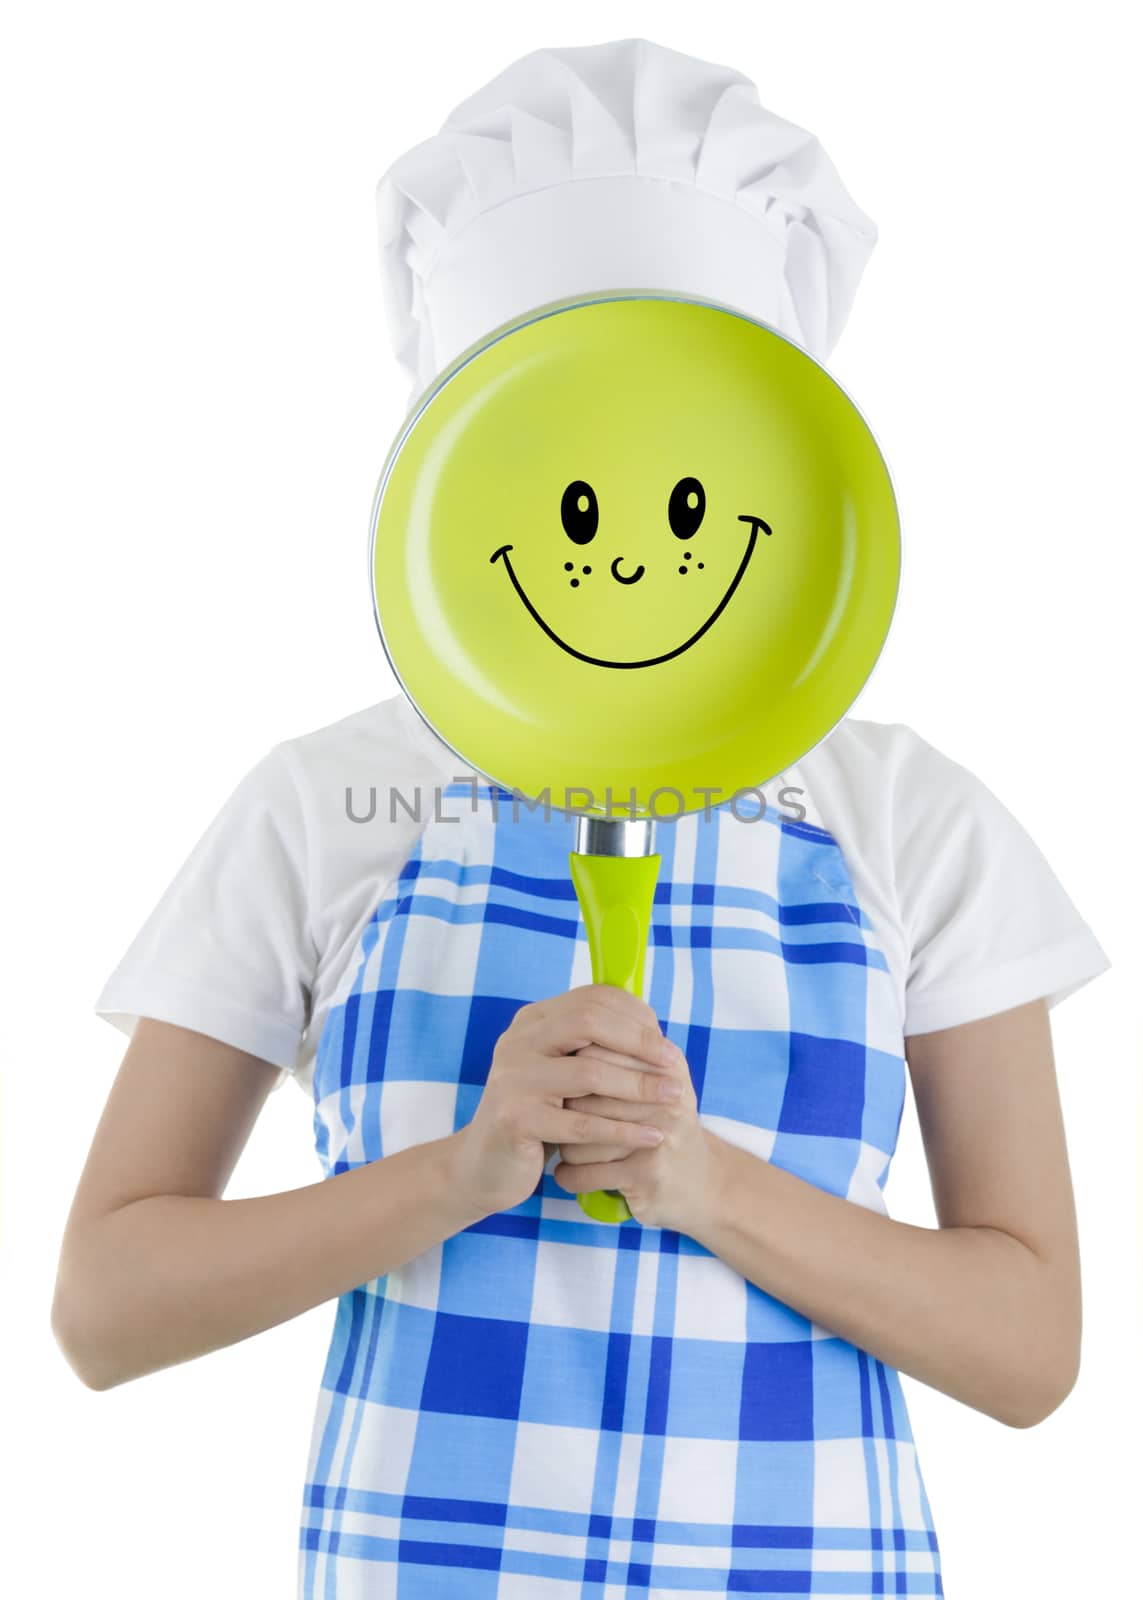 Frying Pan Smiley Face by NicoletaIonescu